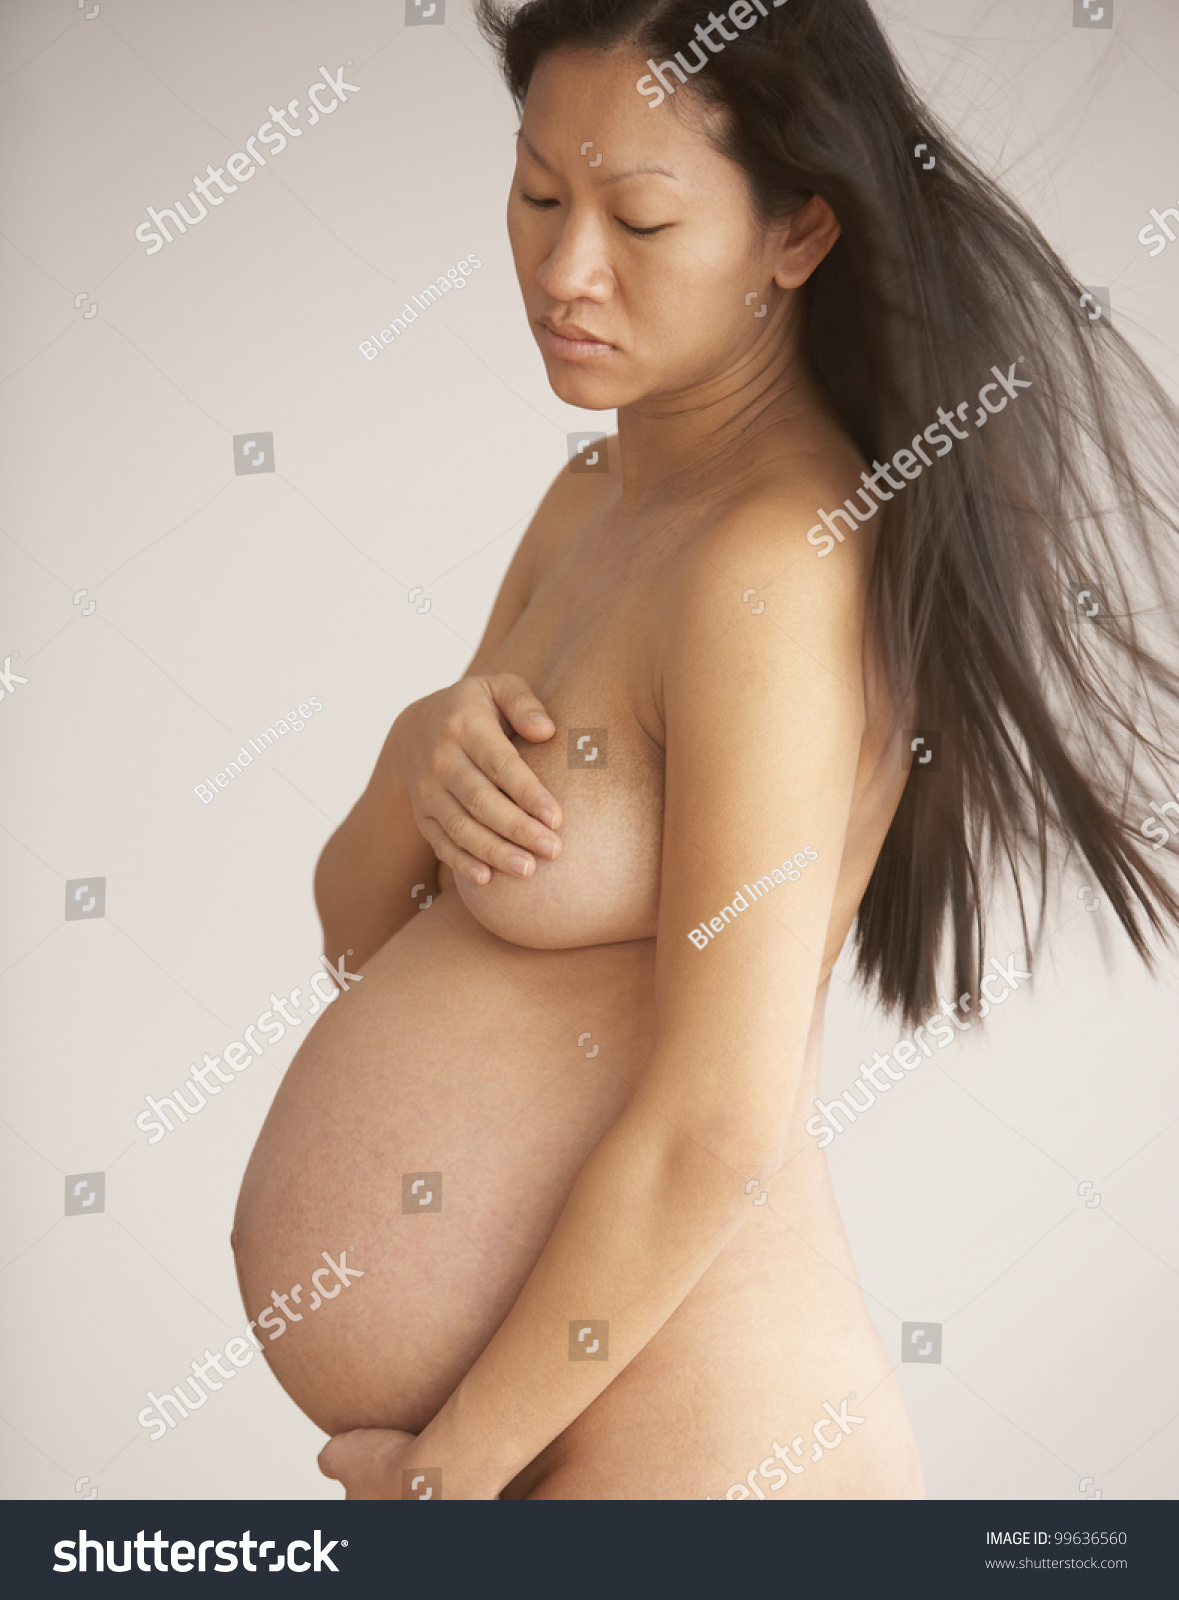 Pregnant And Nude 36